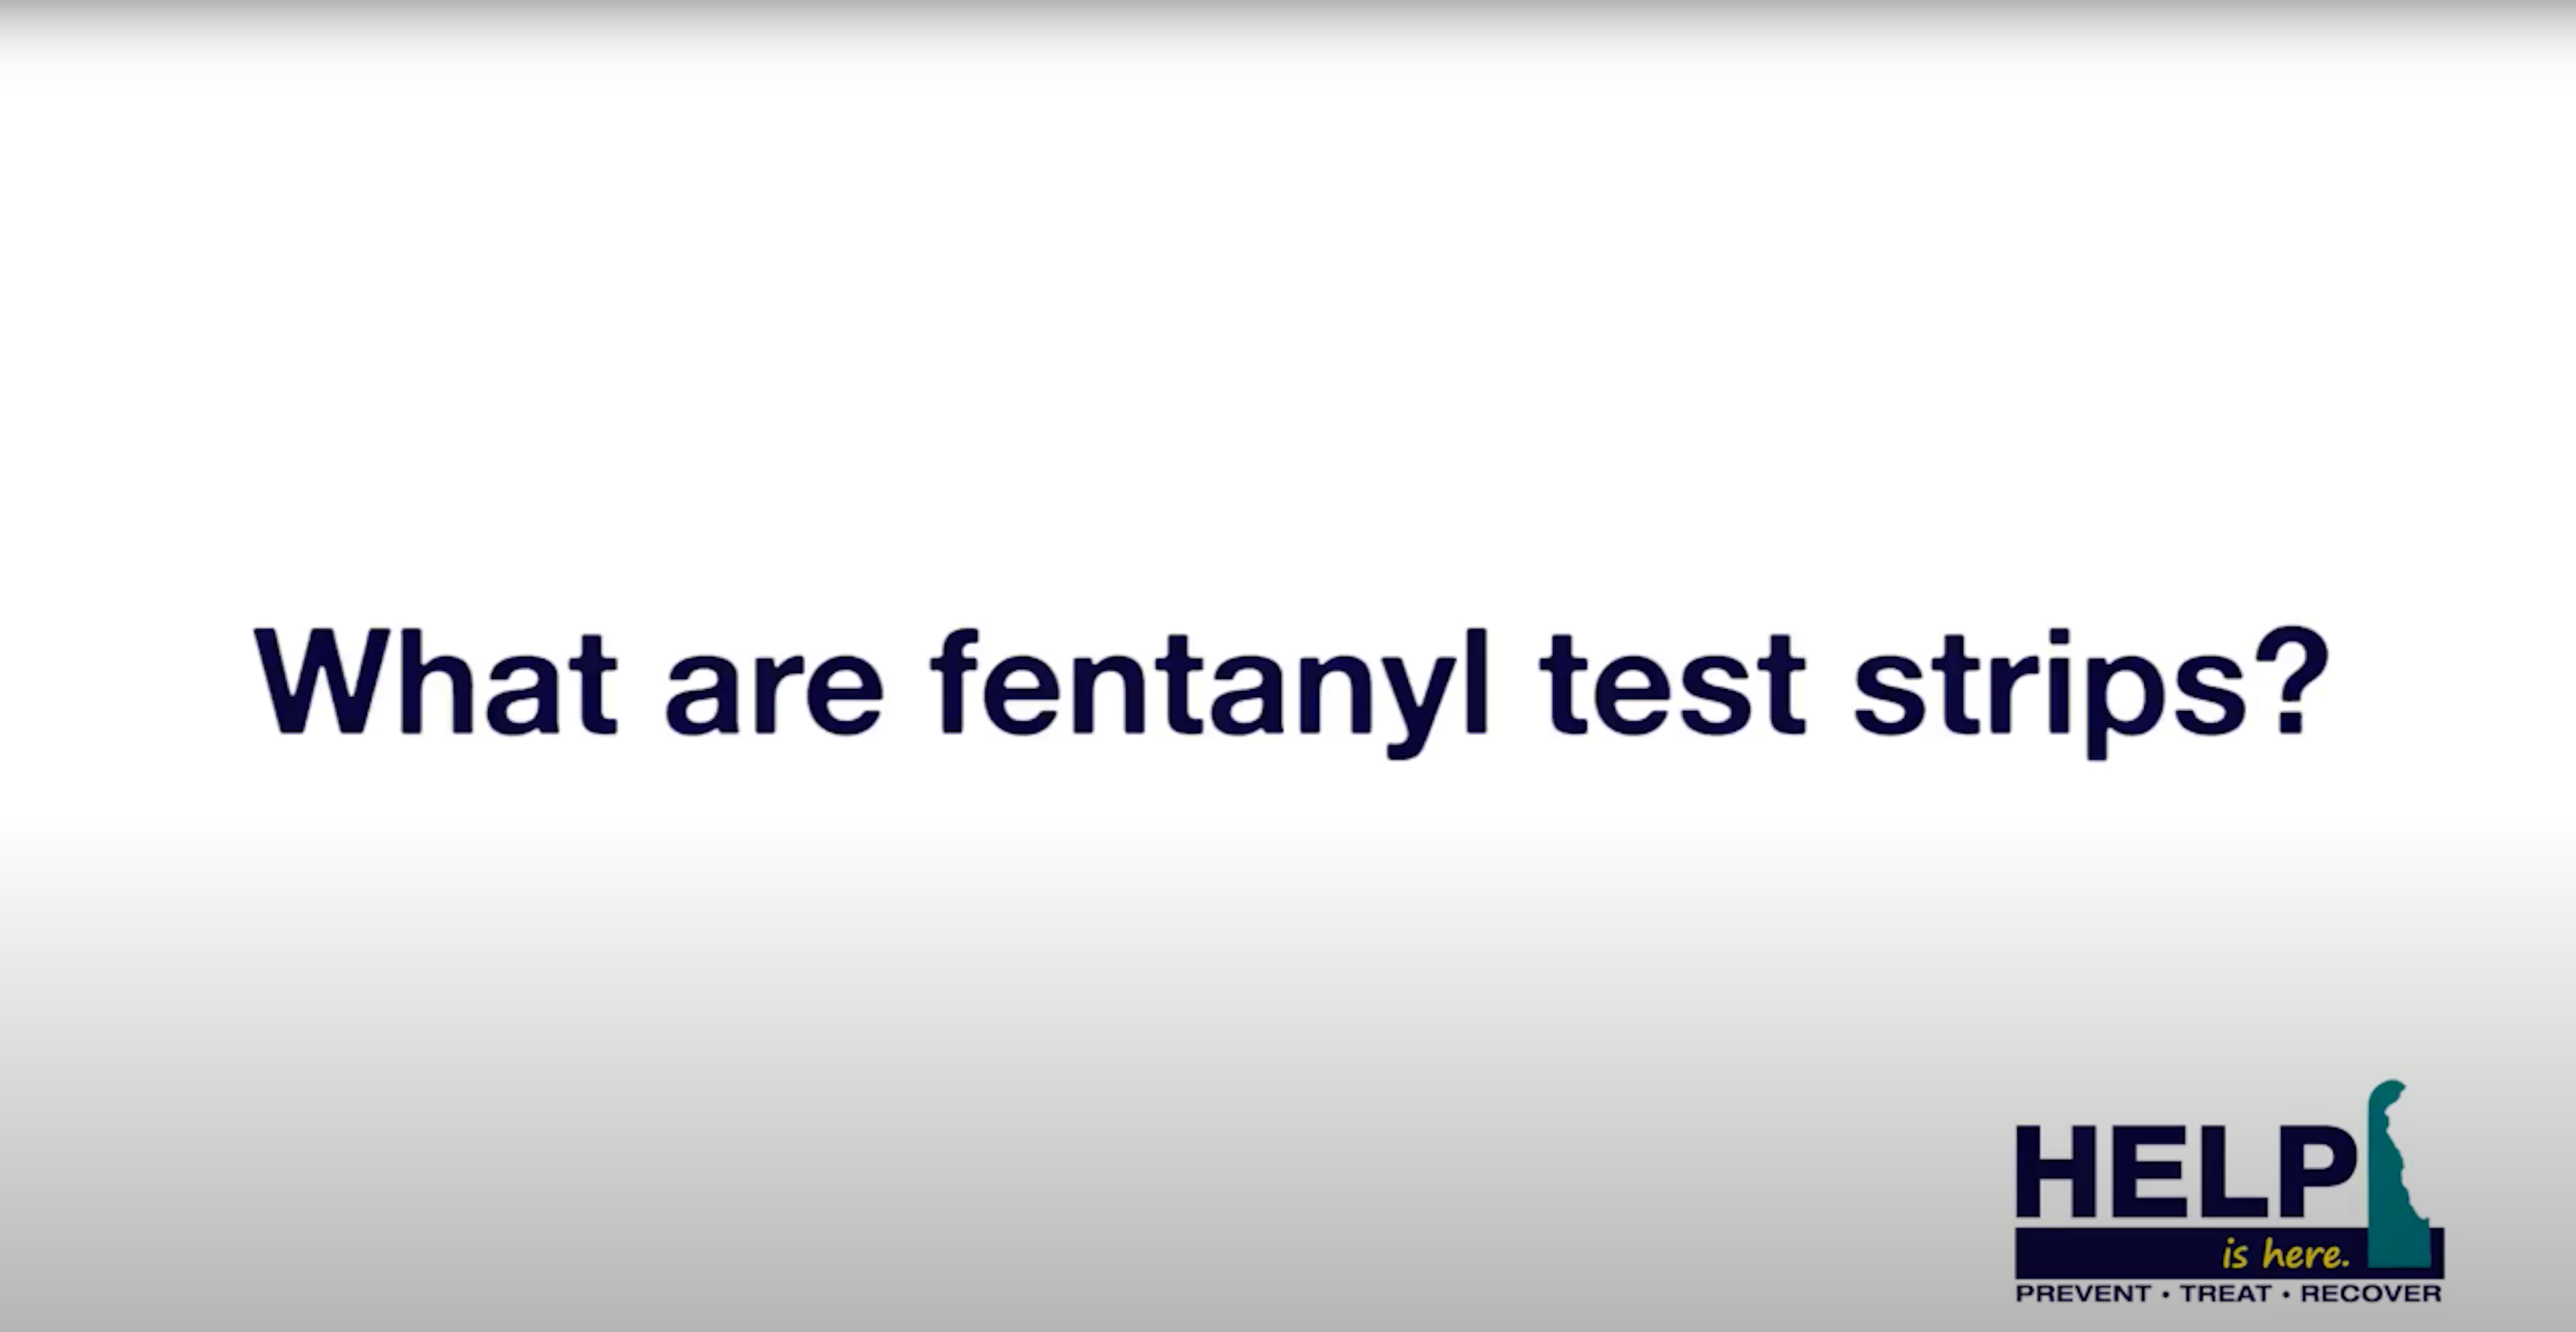 What are fentanyl test strips?